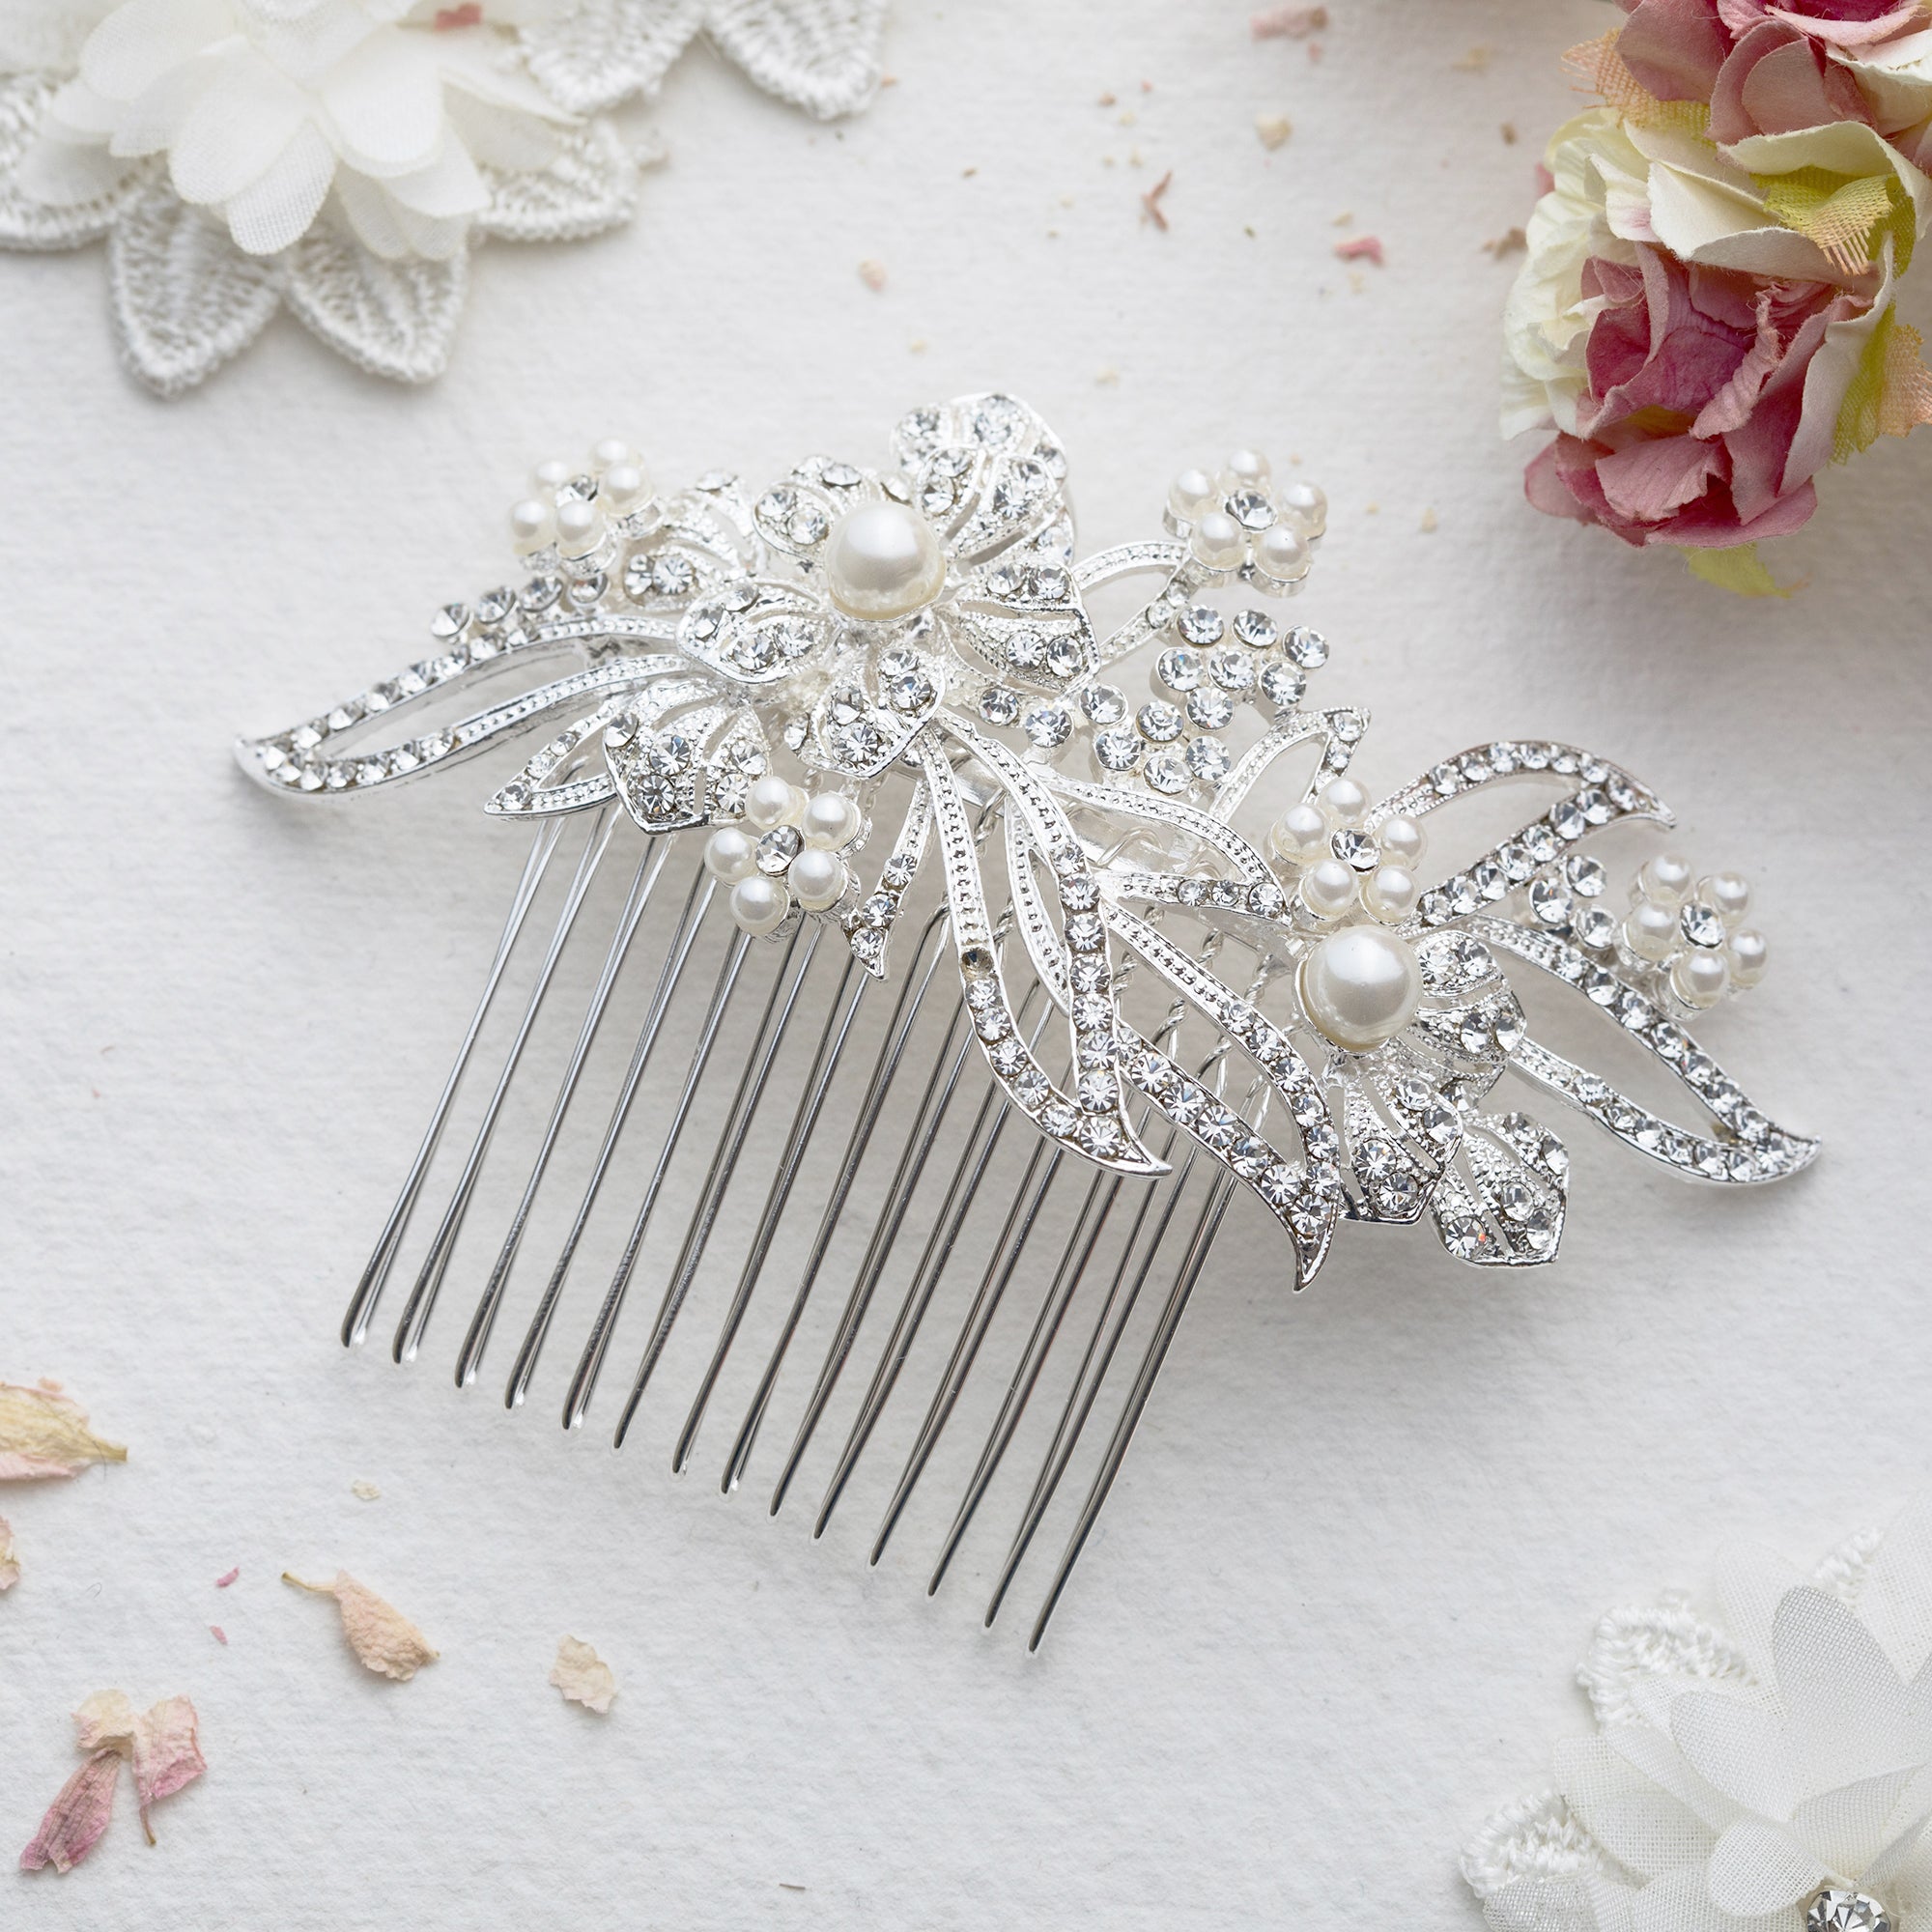 Lily crystal hair comb